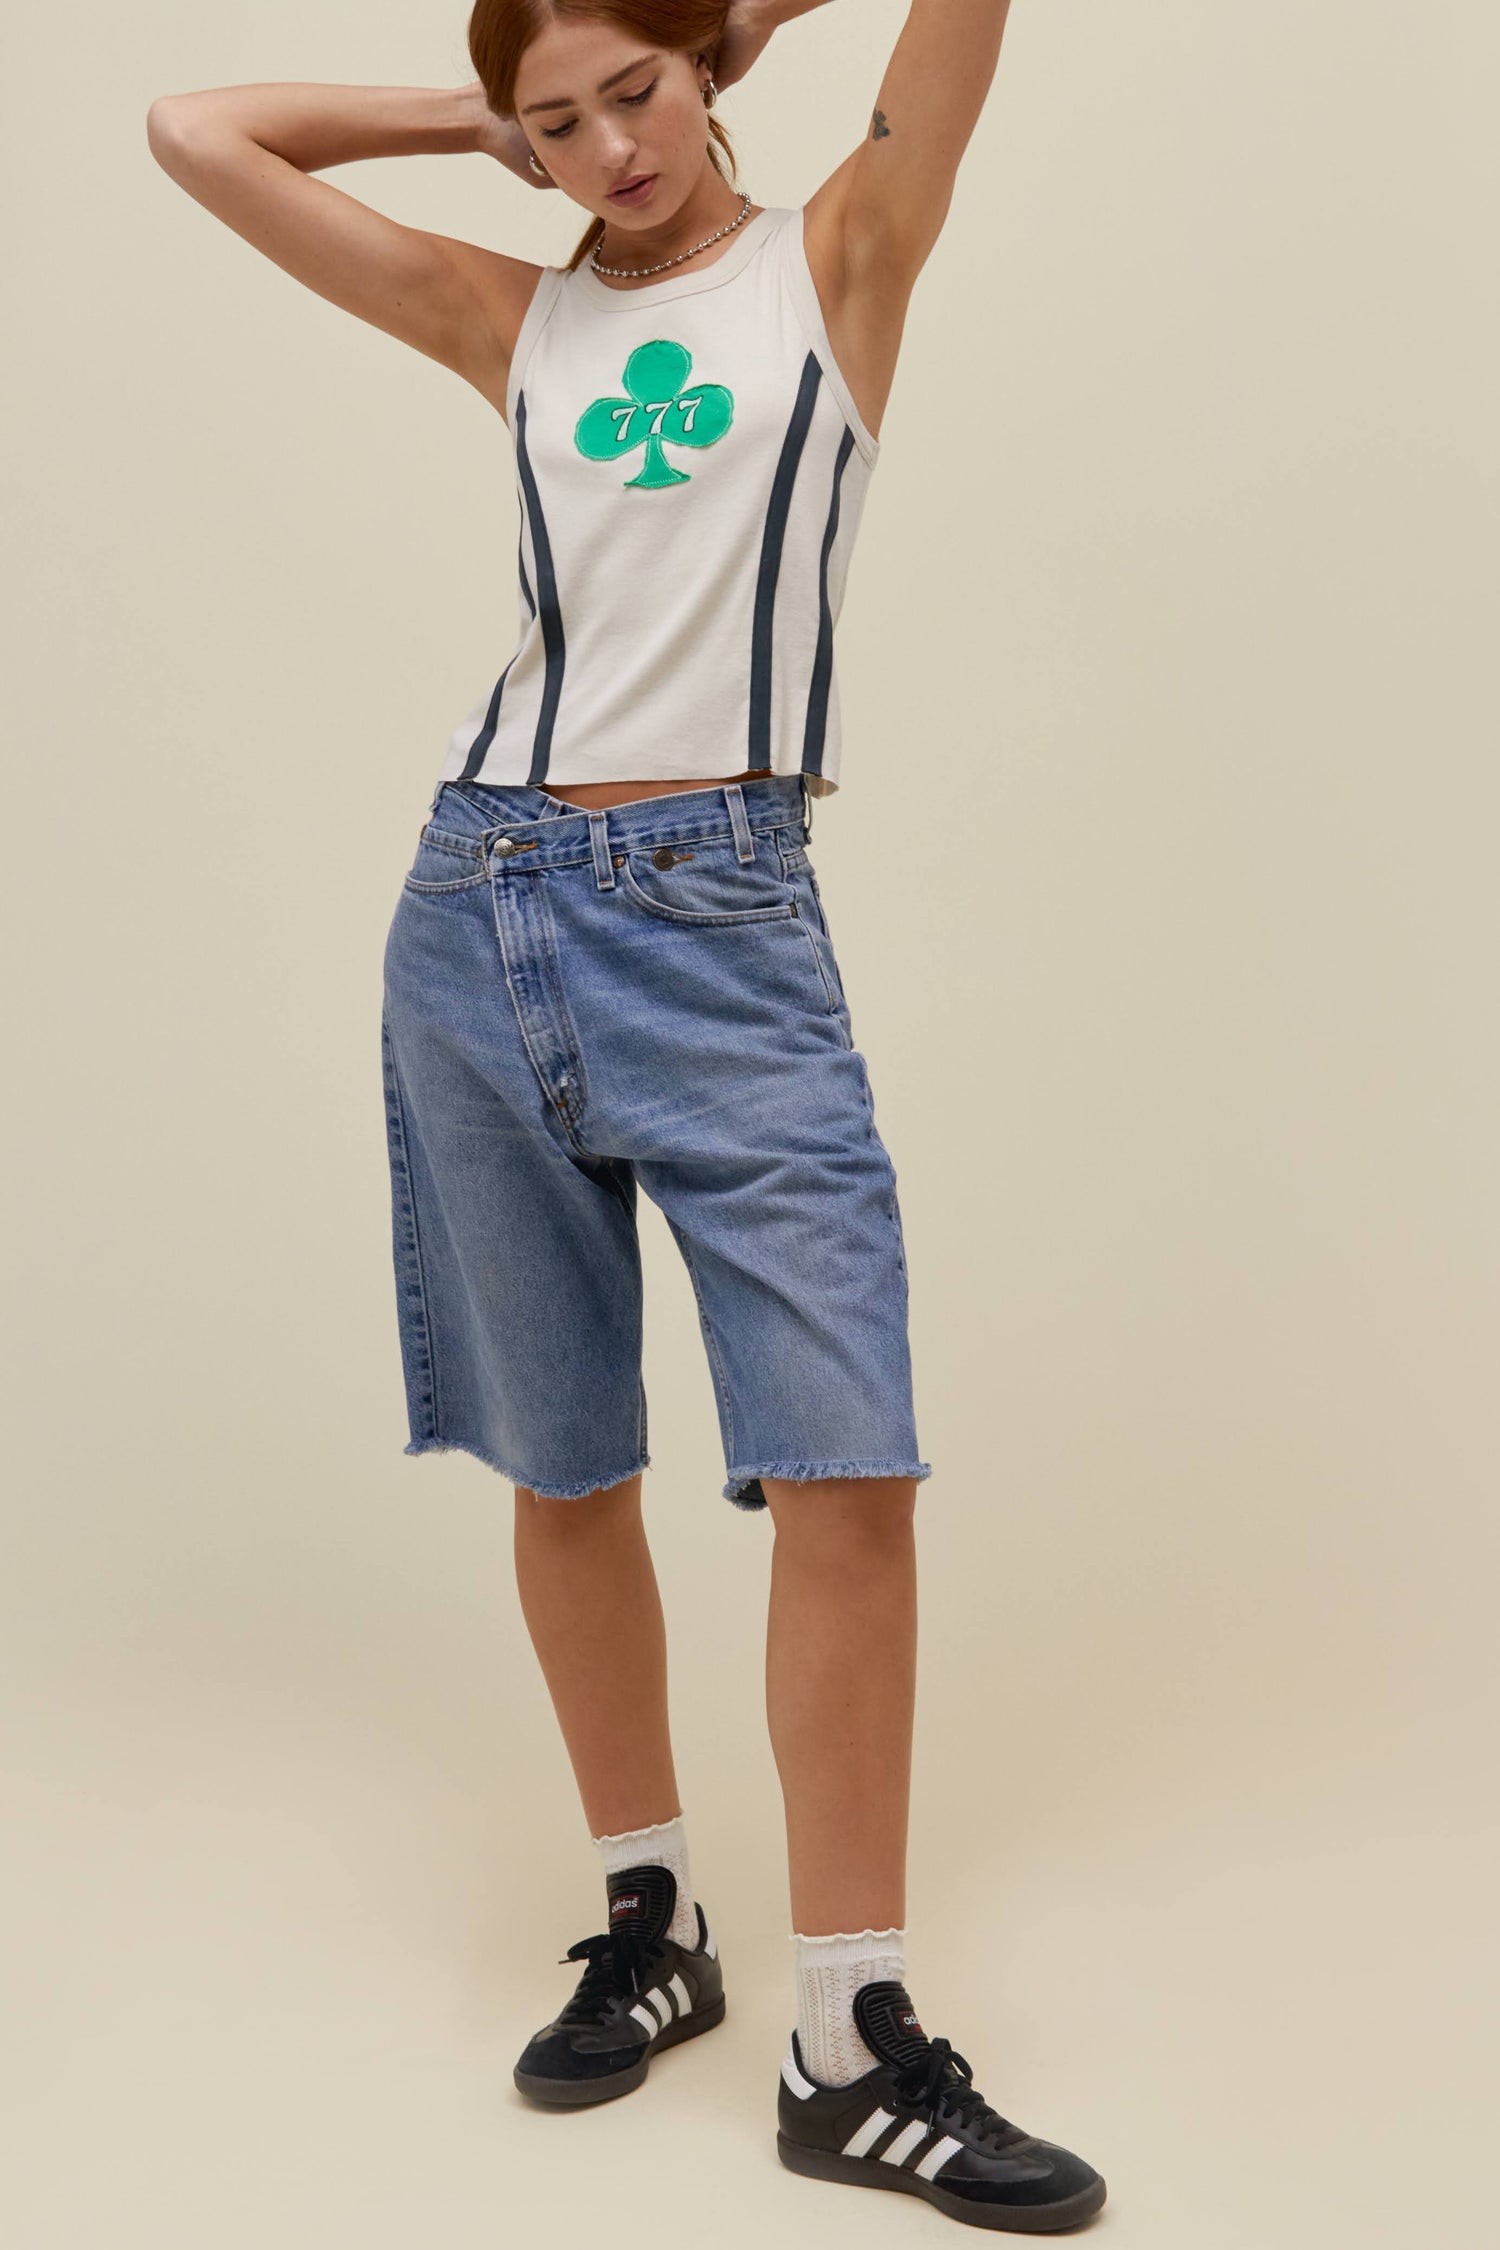 A  model wearing a tank top featuring a semi-medium clover leaf with the numbers 777 on it font 